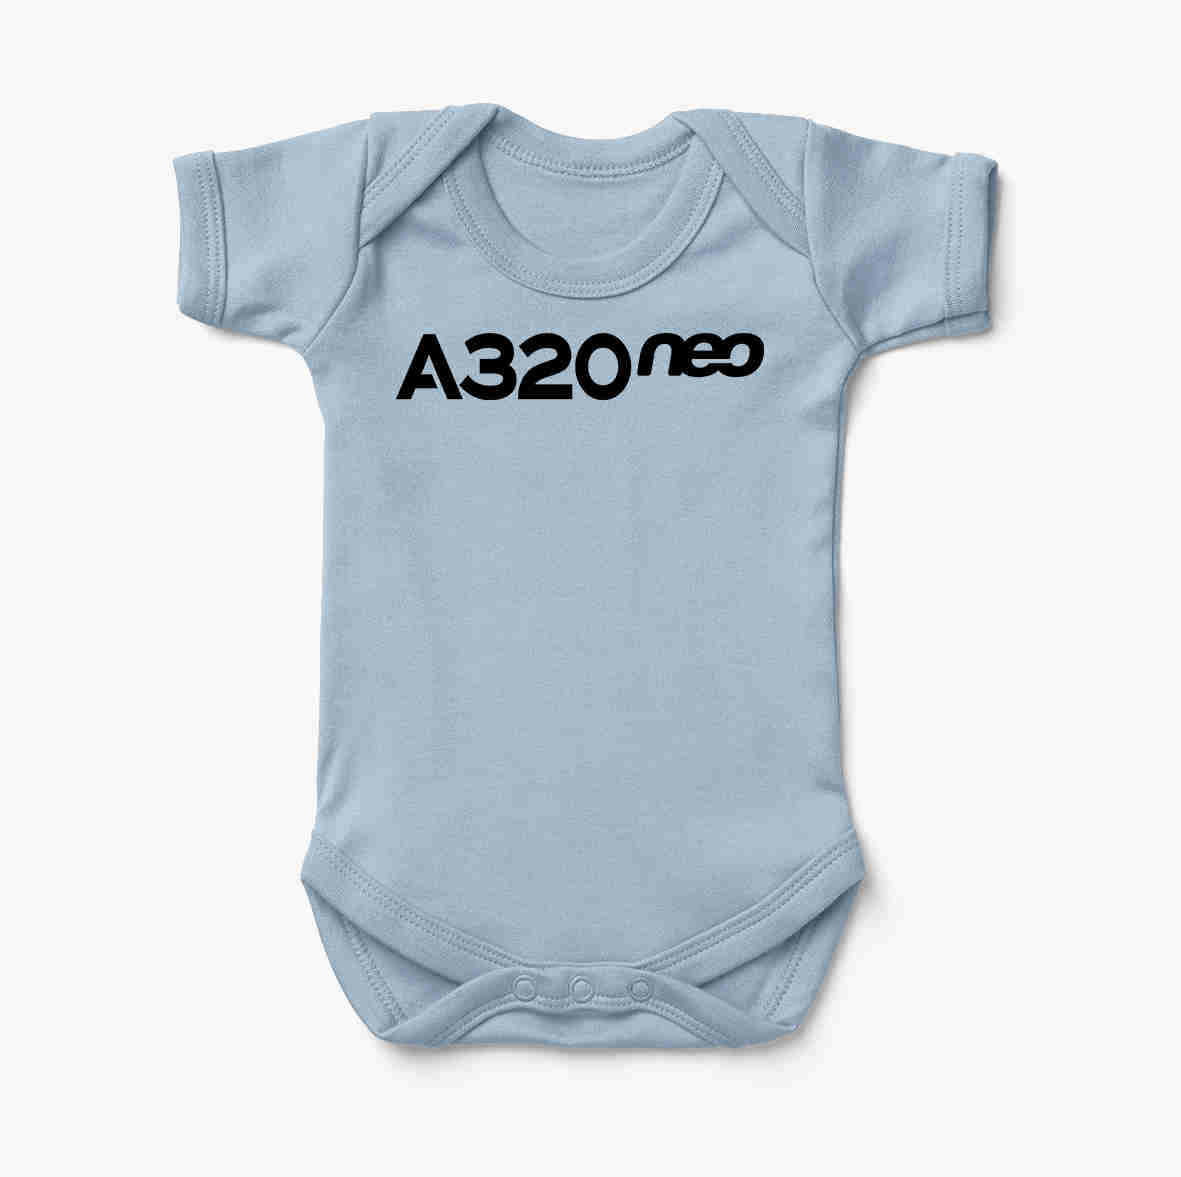 A320neo & Text Designed Baby Bodysuits